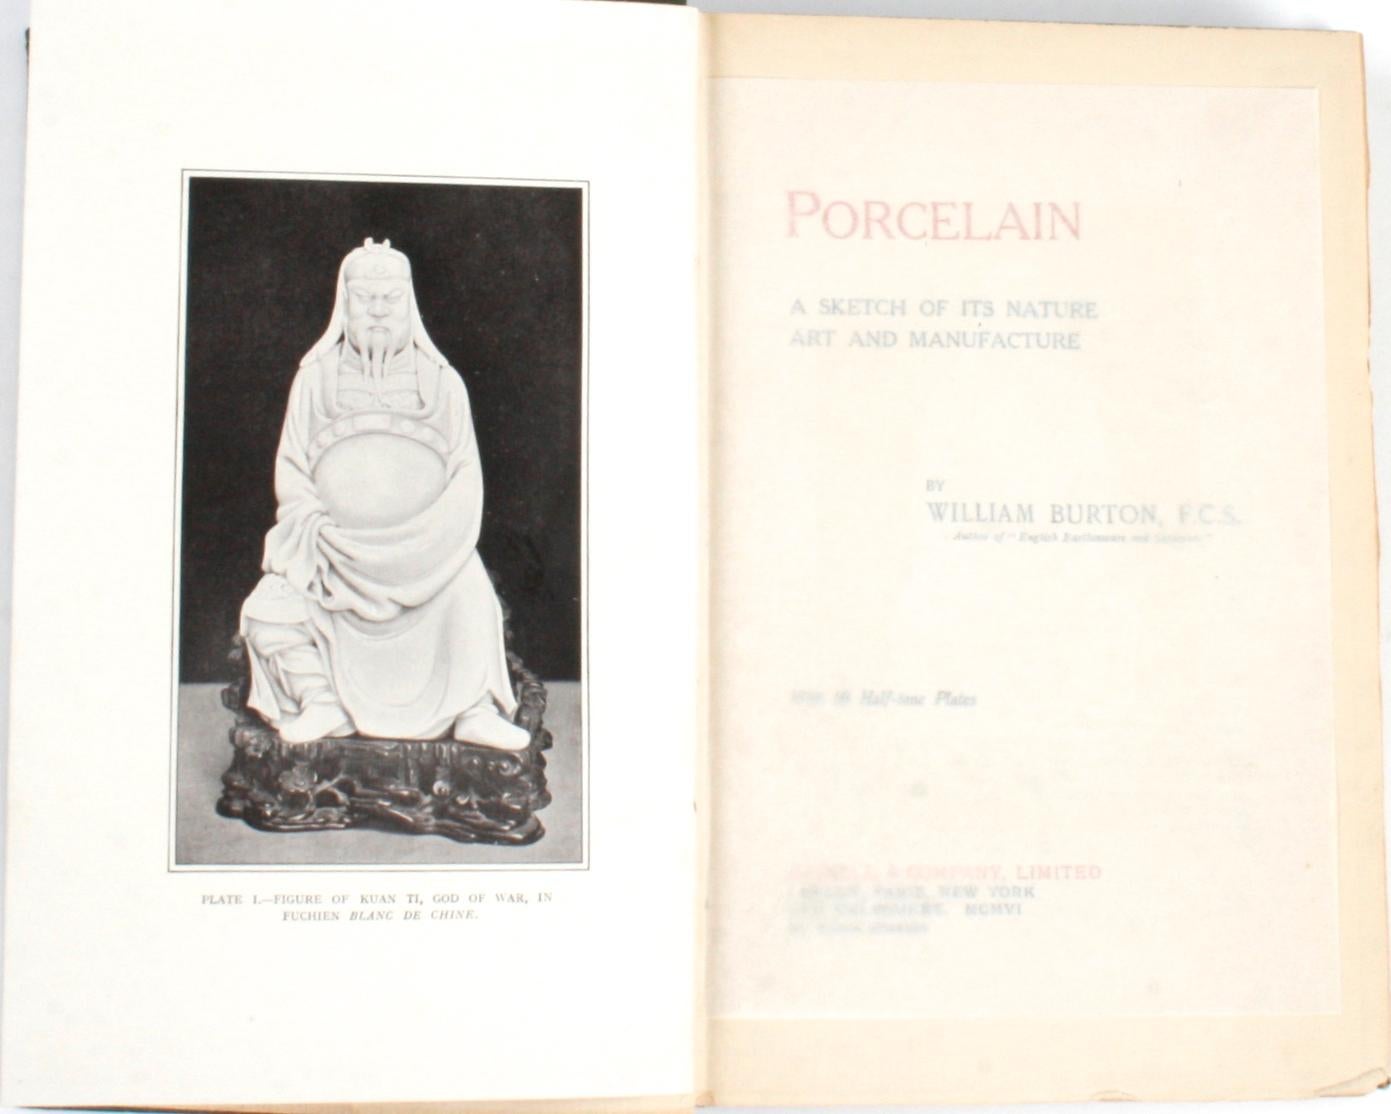 Porcelain, a sketch of its nature art and manufacture by William Burton, F.C.S. London: Cassell & Company, Limited, 1906. First Edition hardcover with no dust jacket. 263 pp. An antique English reference guide of porcelain including 50 beautiful